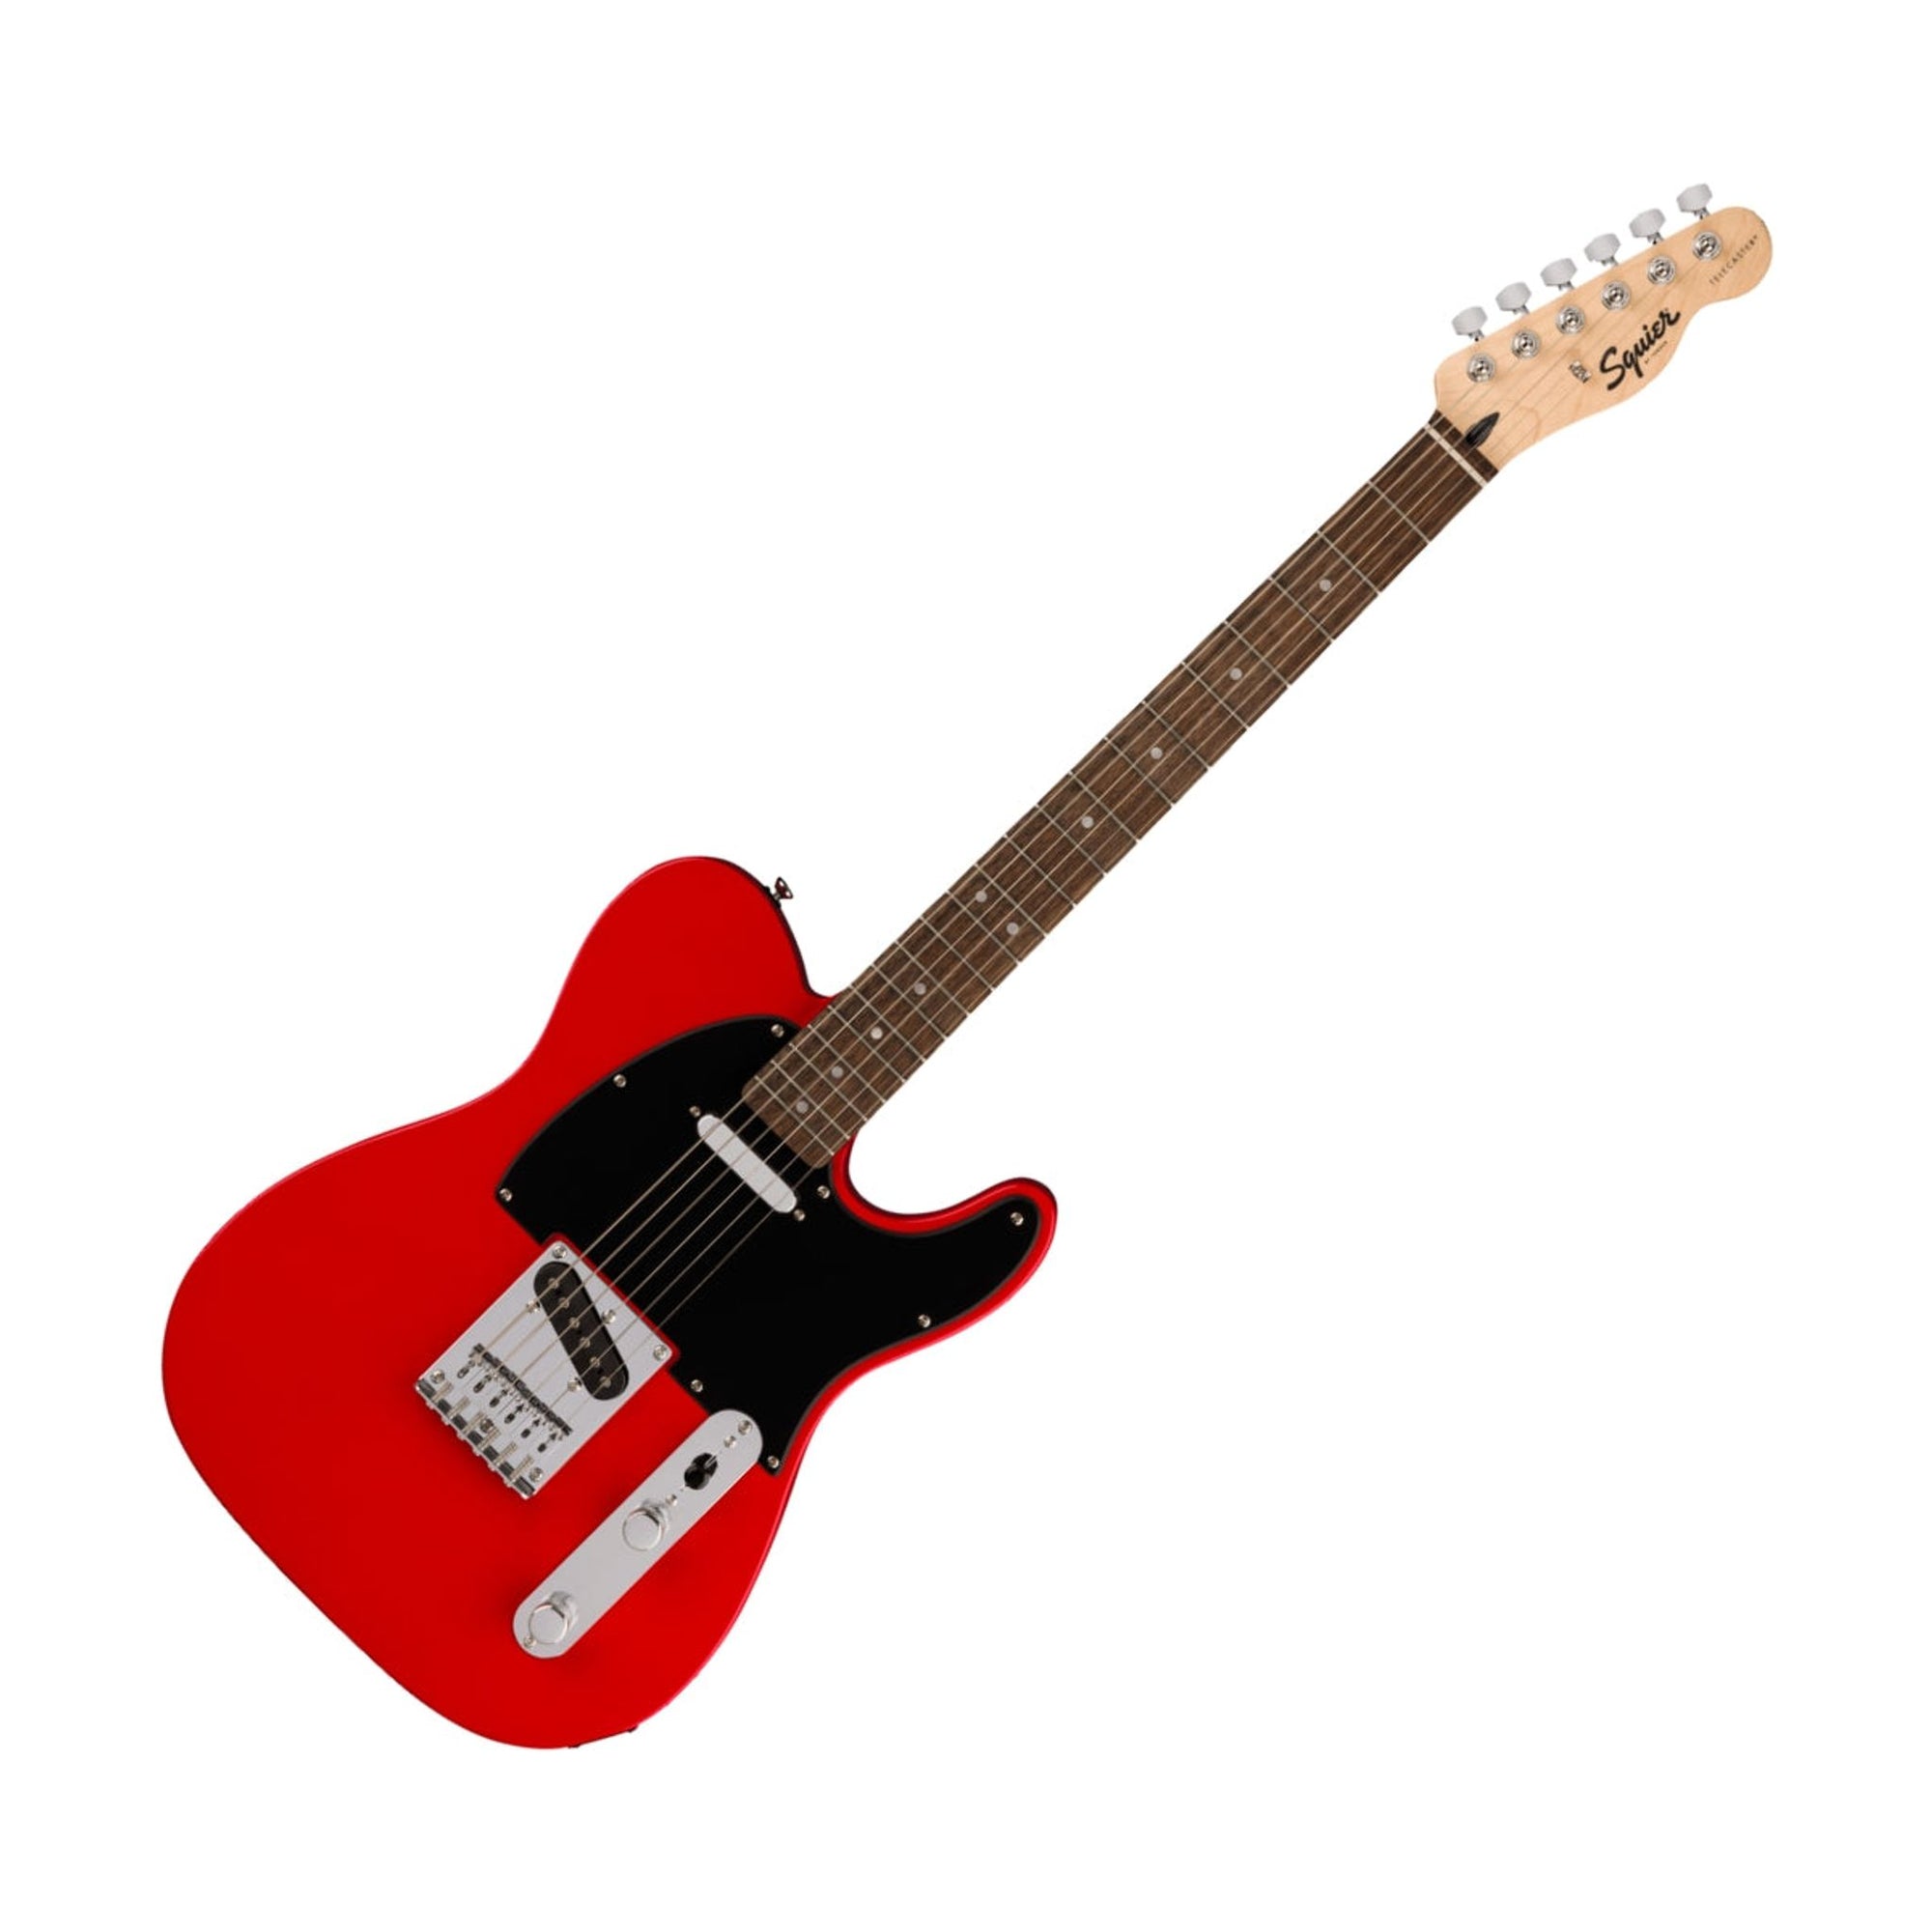 The Fender Squier Sonic Telecaster Electric Guitar is ready to launch any musical adventure into warp speed, offering iconic Fender style and inspiring tone for players at any stage